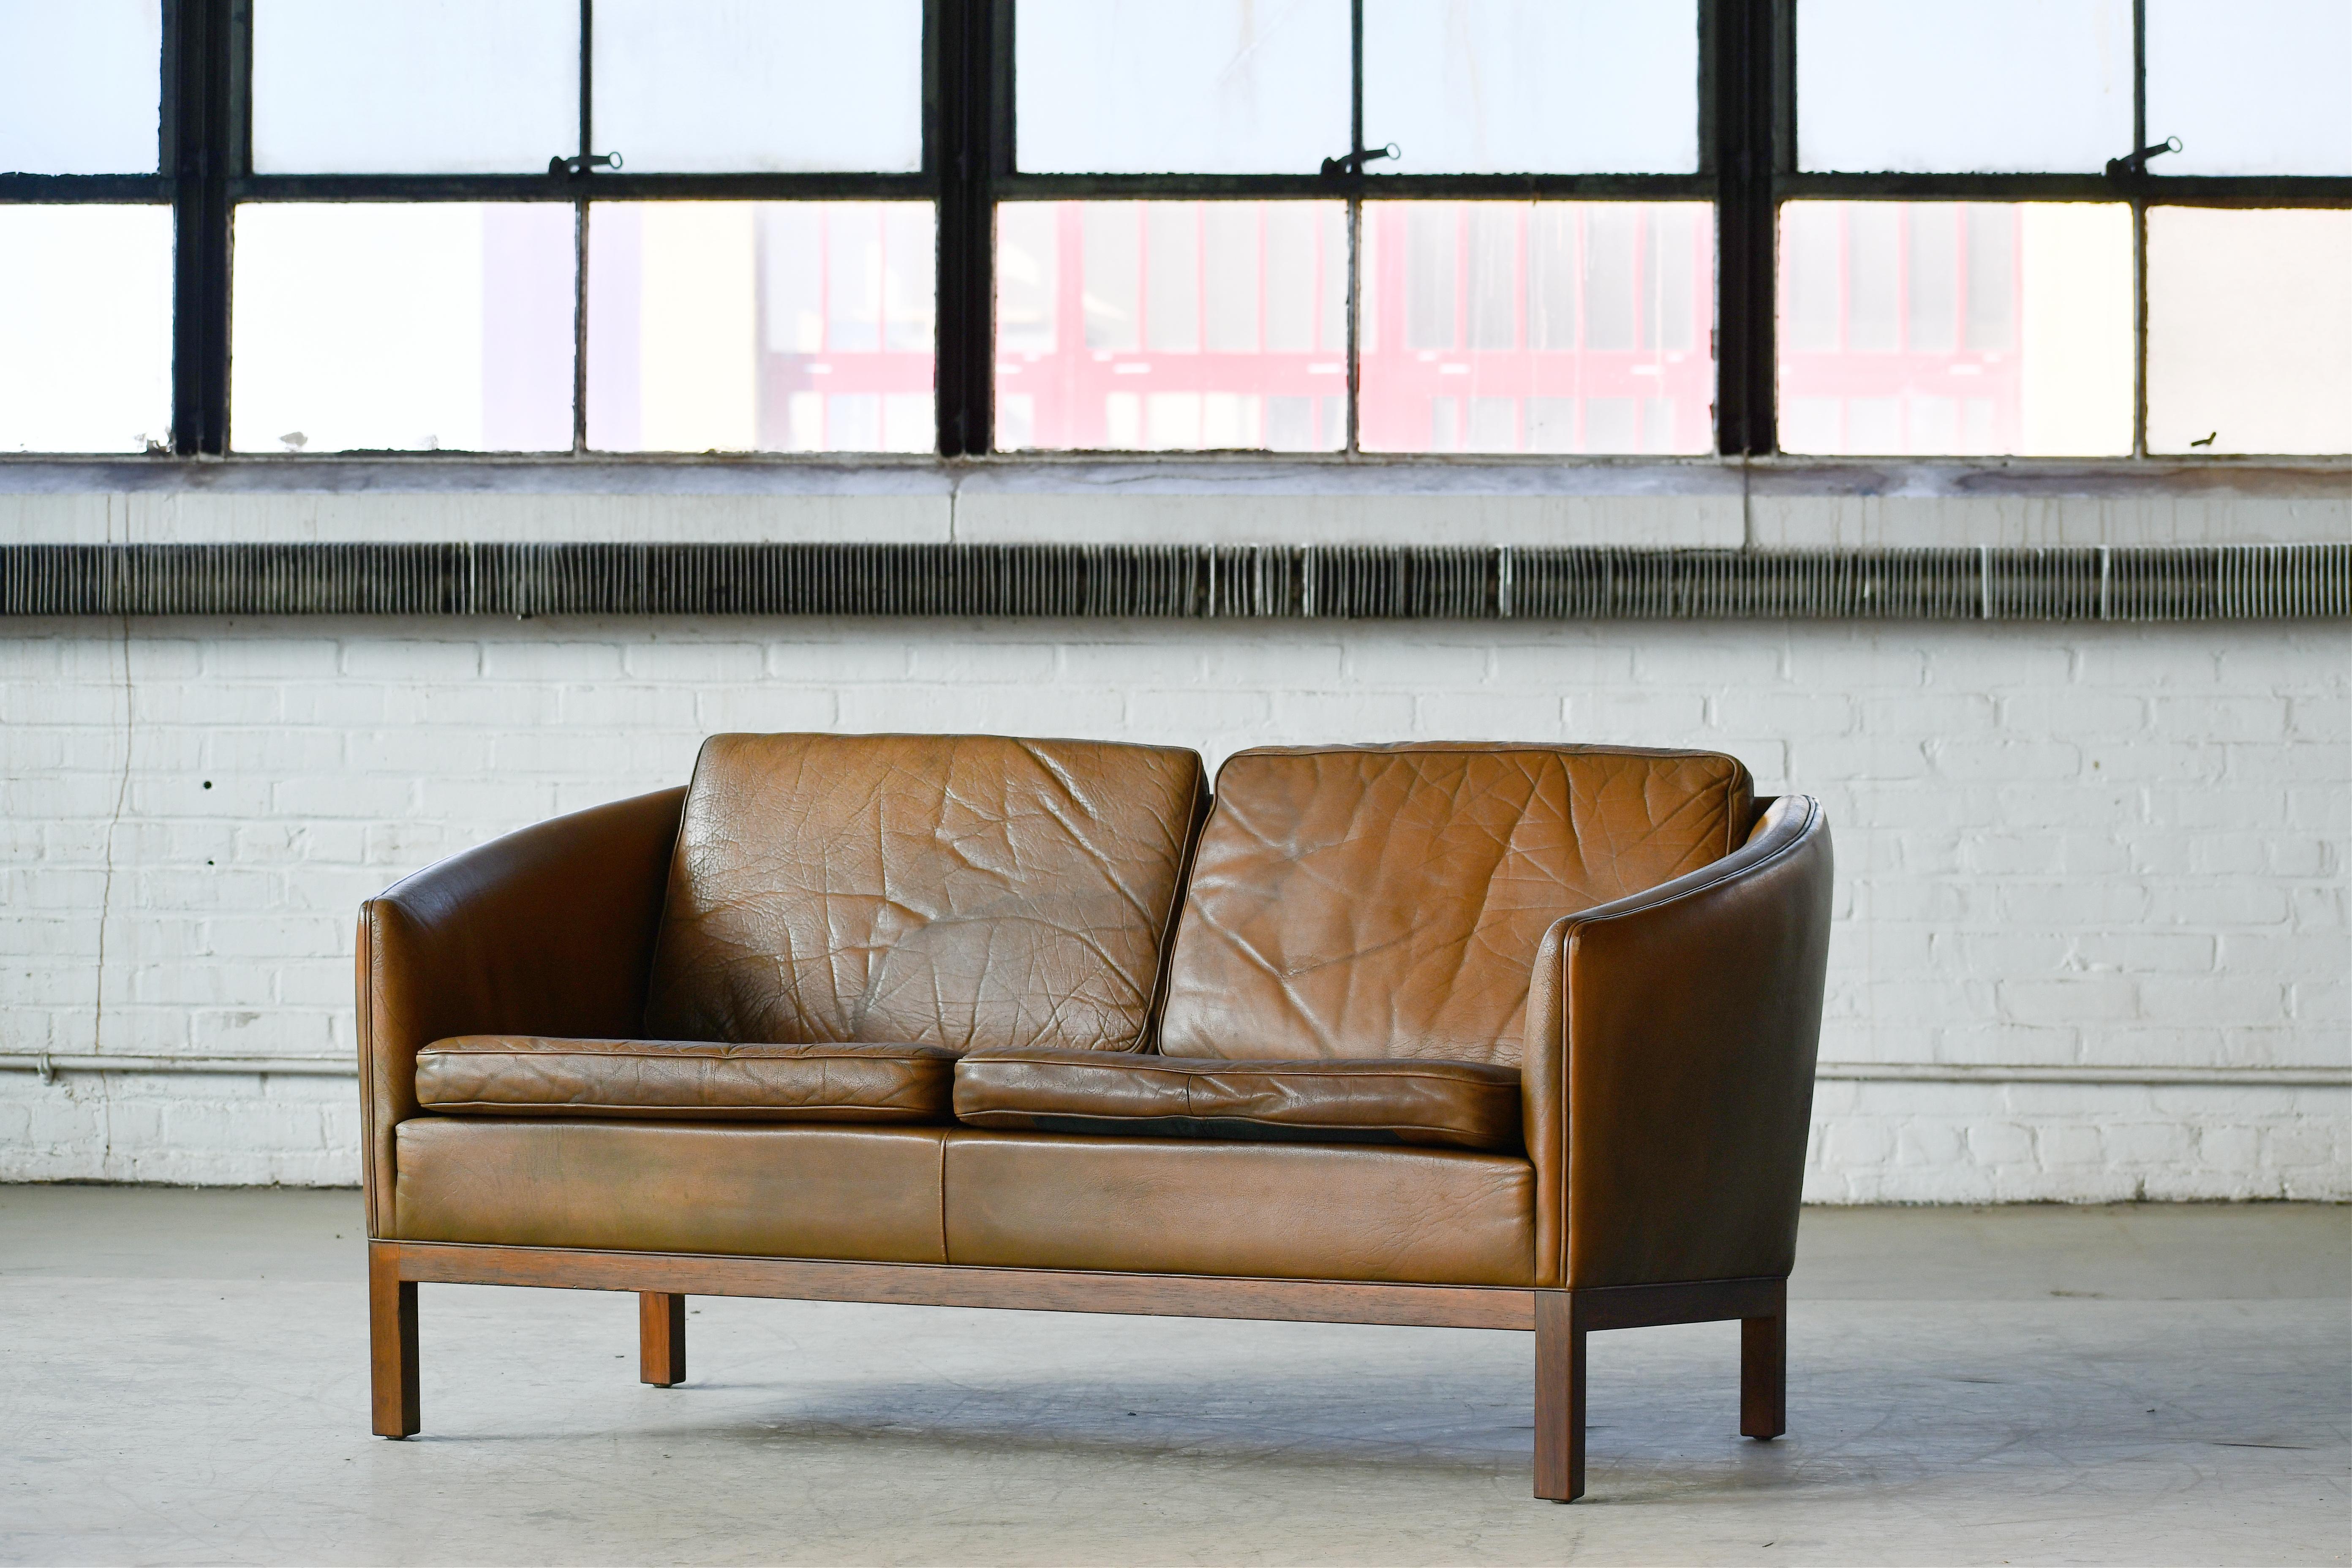 Classic Danish Illum Wikkelso designed sofa in a light brown Buffalo leather. Raised on a base of rosewood giving the sofa richness and elegance.  The perfect relaxed look of the 1960's probably made around late 1960's to sometime in the 1970's.